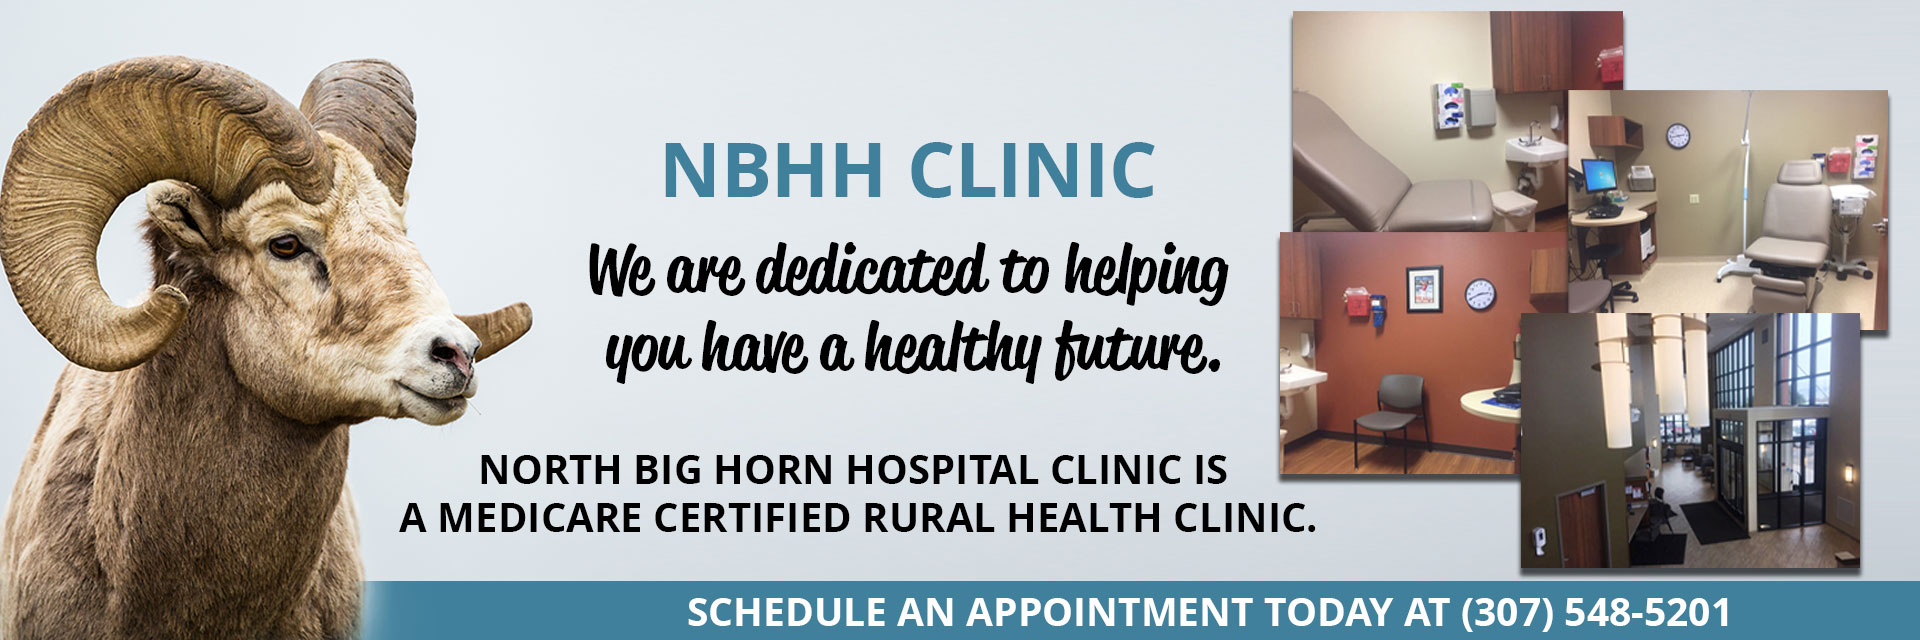 NBHH CLINIC
We are dedicated to helping you have a healthy future.
NORTH BIG HORN HOSPITAL CLINIC IS A MEDICARE CERTIFIED RURAL HEALTH CLINIC

SCHEDULE AN APPOINTMENT TODAY AT (307)548-5201